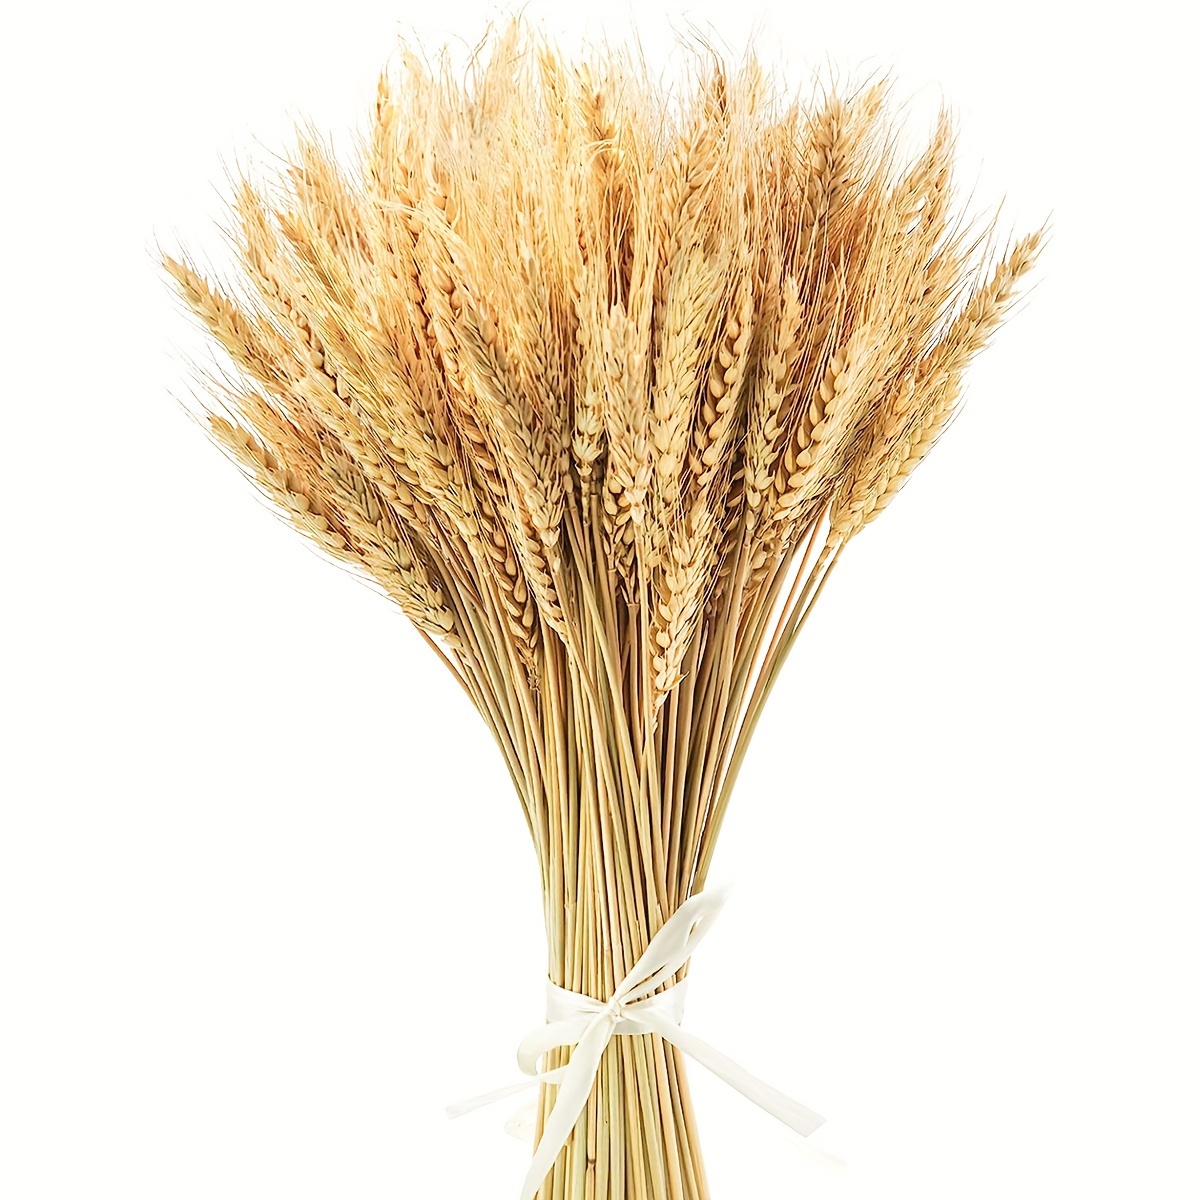 

17.7 Inches Dried Wheat Stalks, 100pcs Dried Flowers Wheat For Home Kitchen Wedding Party Table Centerpiece Harvest Wreath Farmhouse Diy Decoration